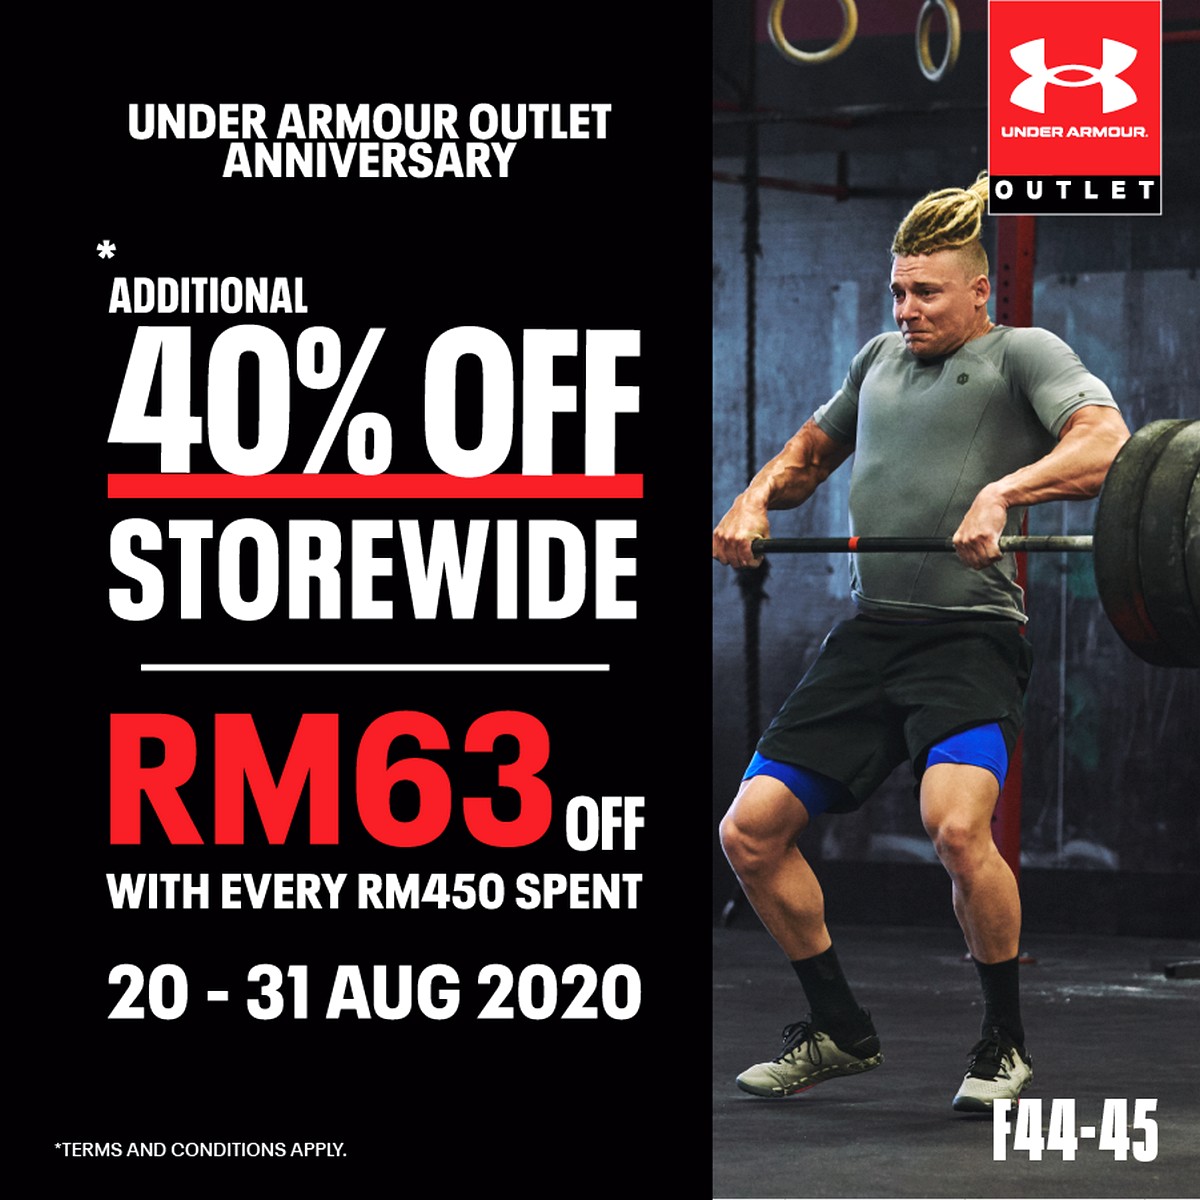 Under-Armour - Apparels Baby & Kids & Toys Bags Children Fashion Dinnerware Fashion Accessories Fashion Lifestyle & Department Store Fitness Footwear Gifts , Souvenir & Jewellery Handbags Home & Garden & Tools Jewels Kitchenware Kuala Lumpur Outdoor Sports Putrajaya Selangor Shopping Malls Sports,Leisure & Travel Sportswear Sunglasses Wallets Warehouse Sale & Clearance in Malaysia 